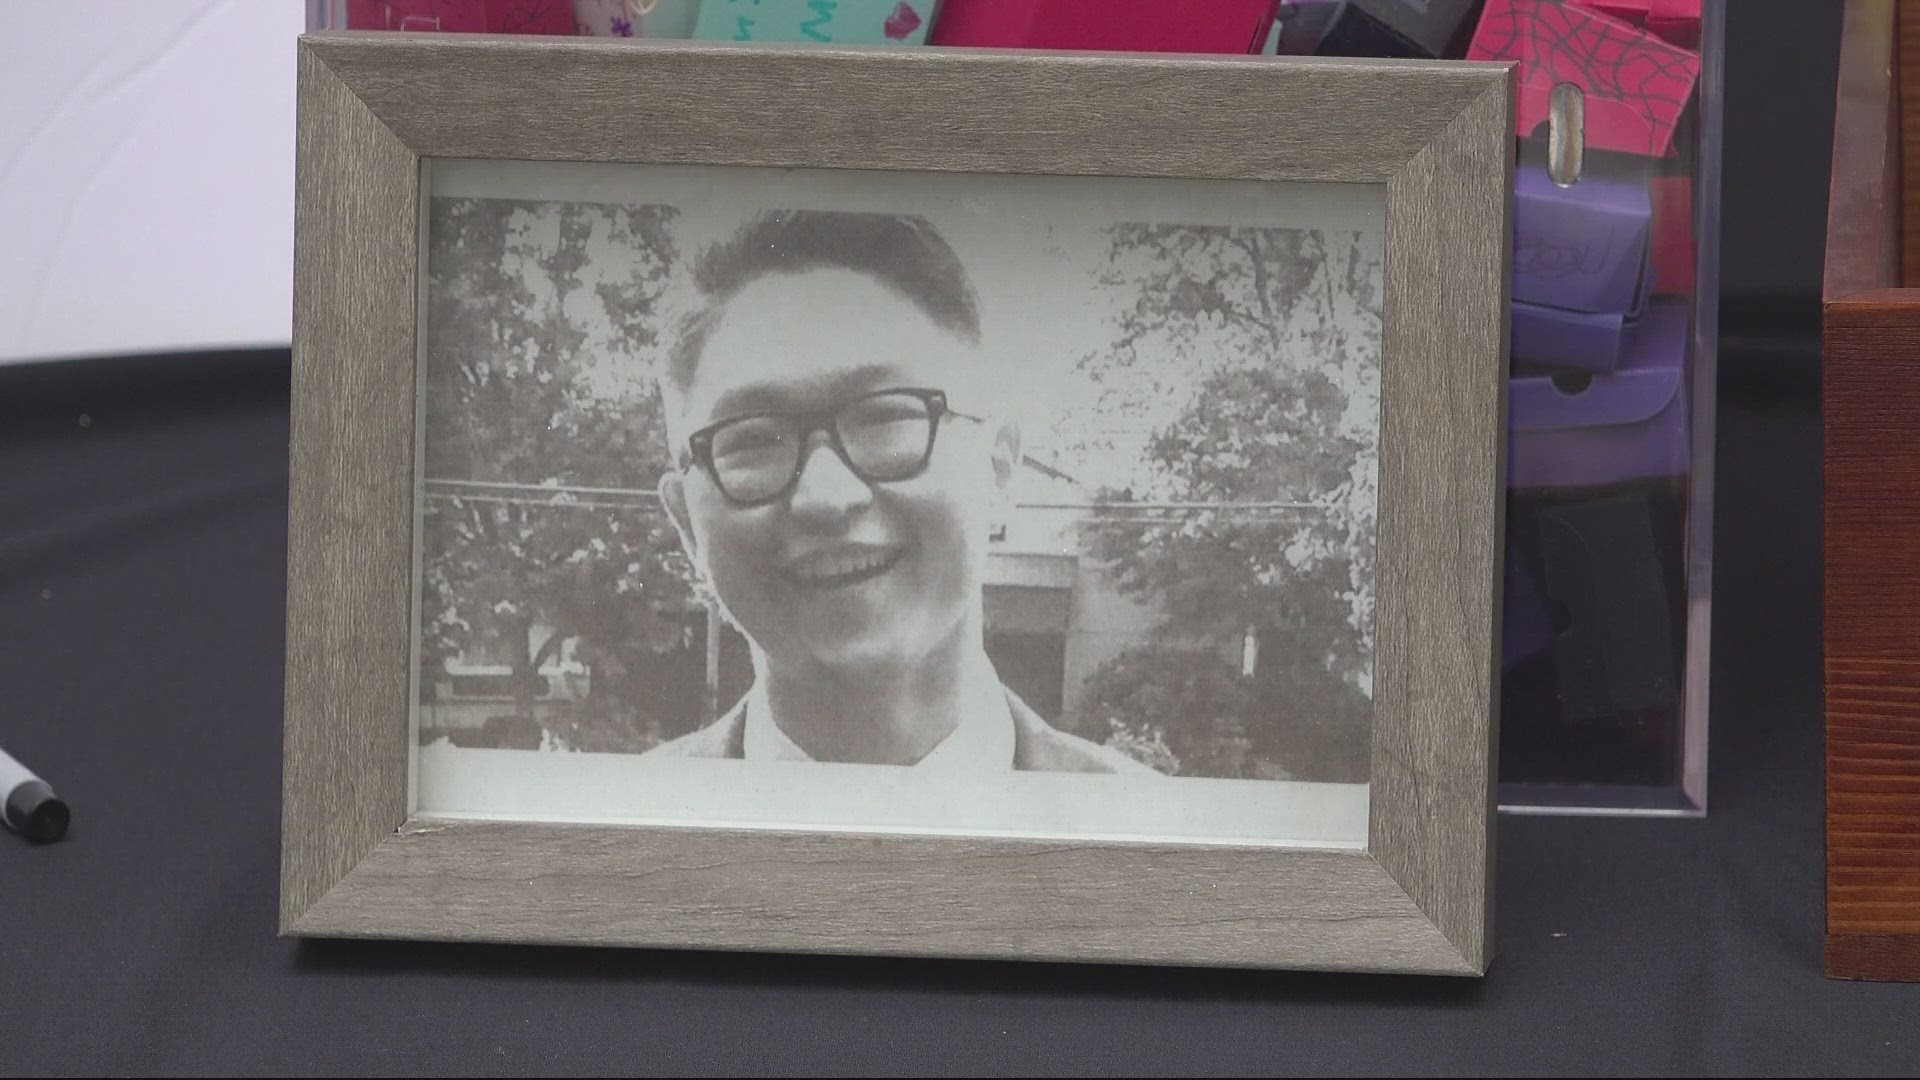 In 2020, Matthew Choi was killed by a man who broke into his apartment. His family started a grant for vendors at farmers markets where 'Choi Kimchi' got its start.